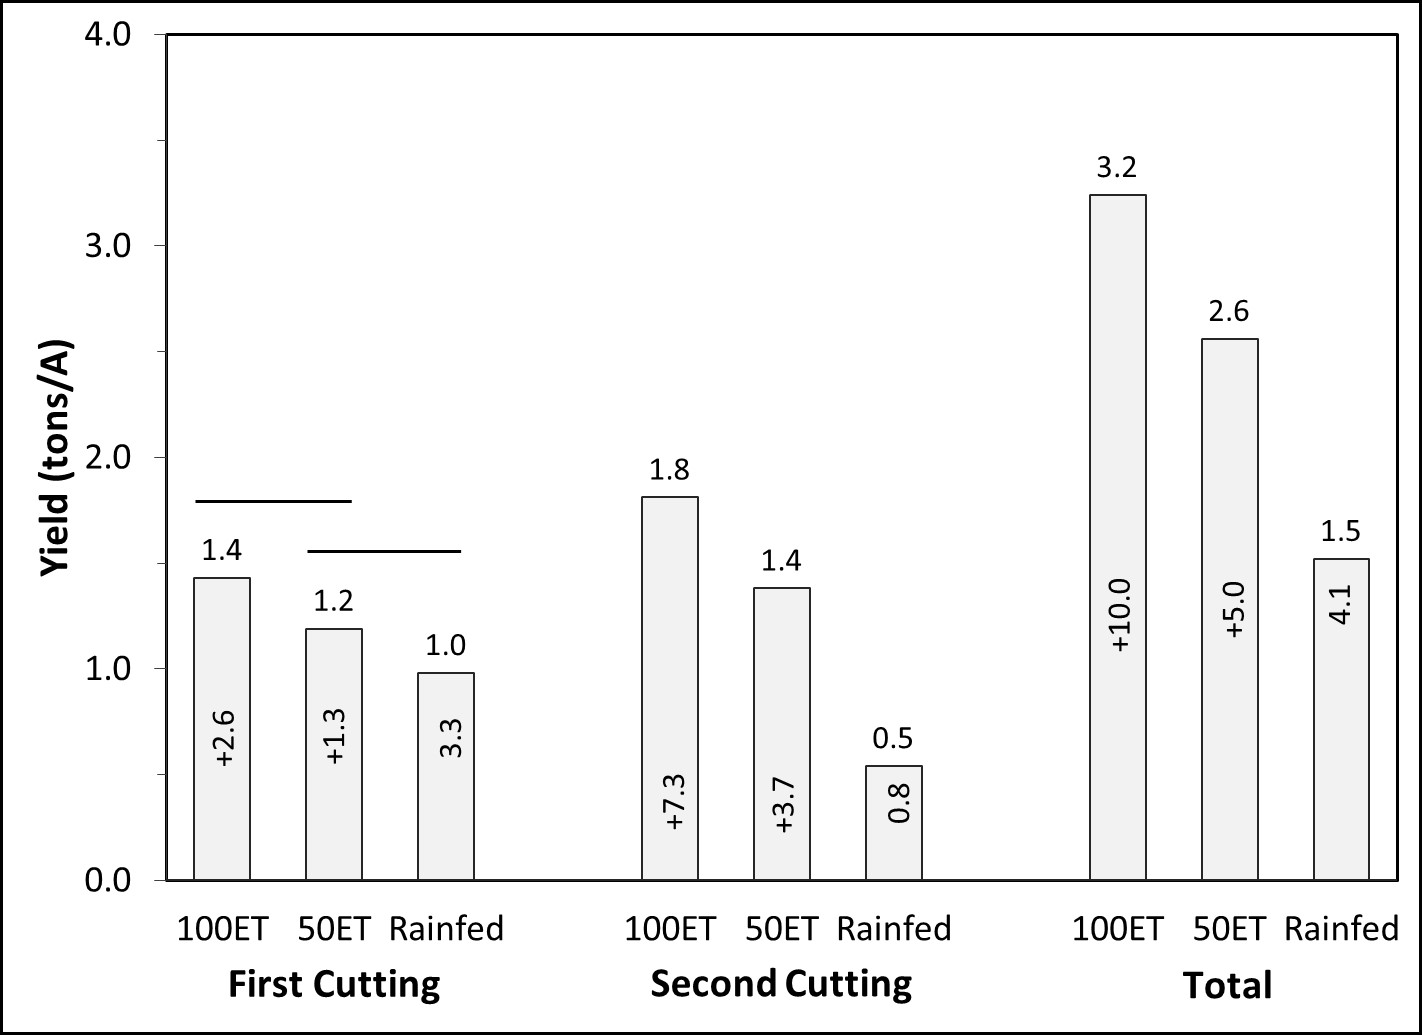 Bar graph showing the relationship between the total yield and the irrigation treatment, for first and second cutting, and the average of the two.